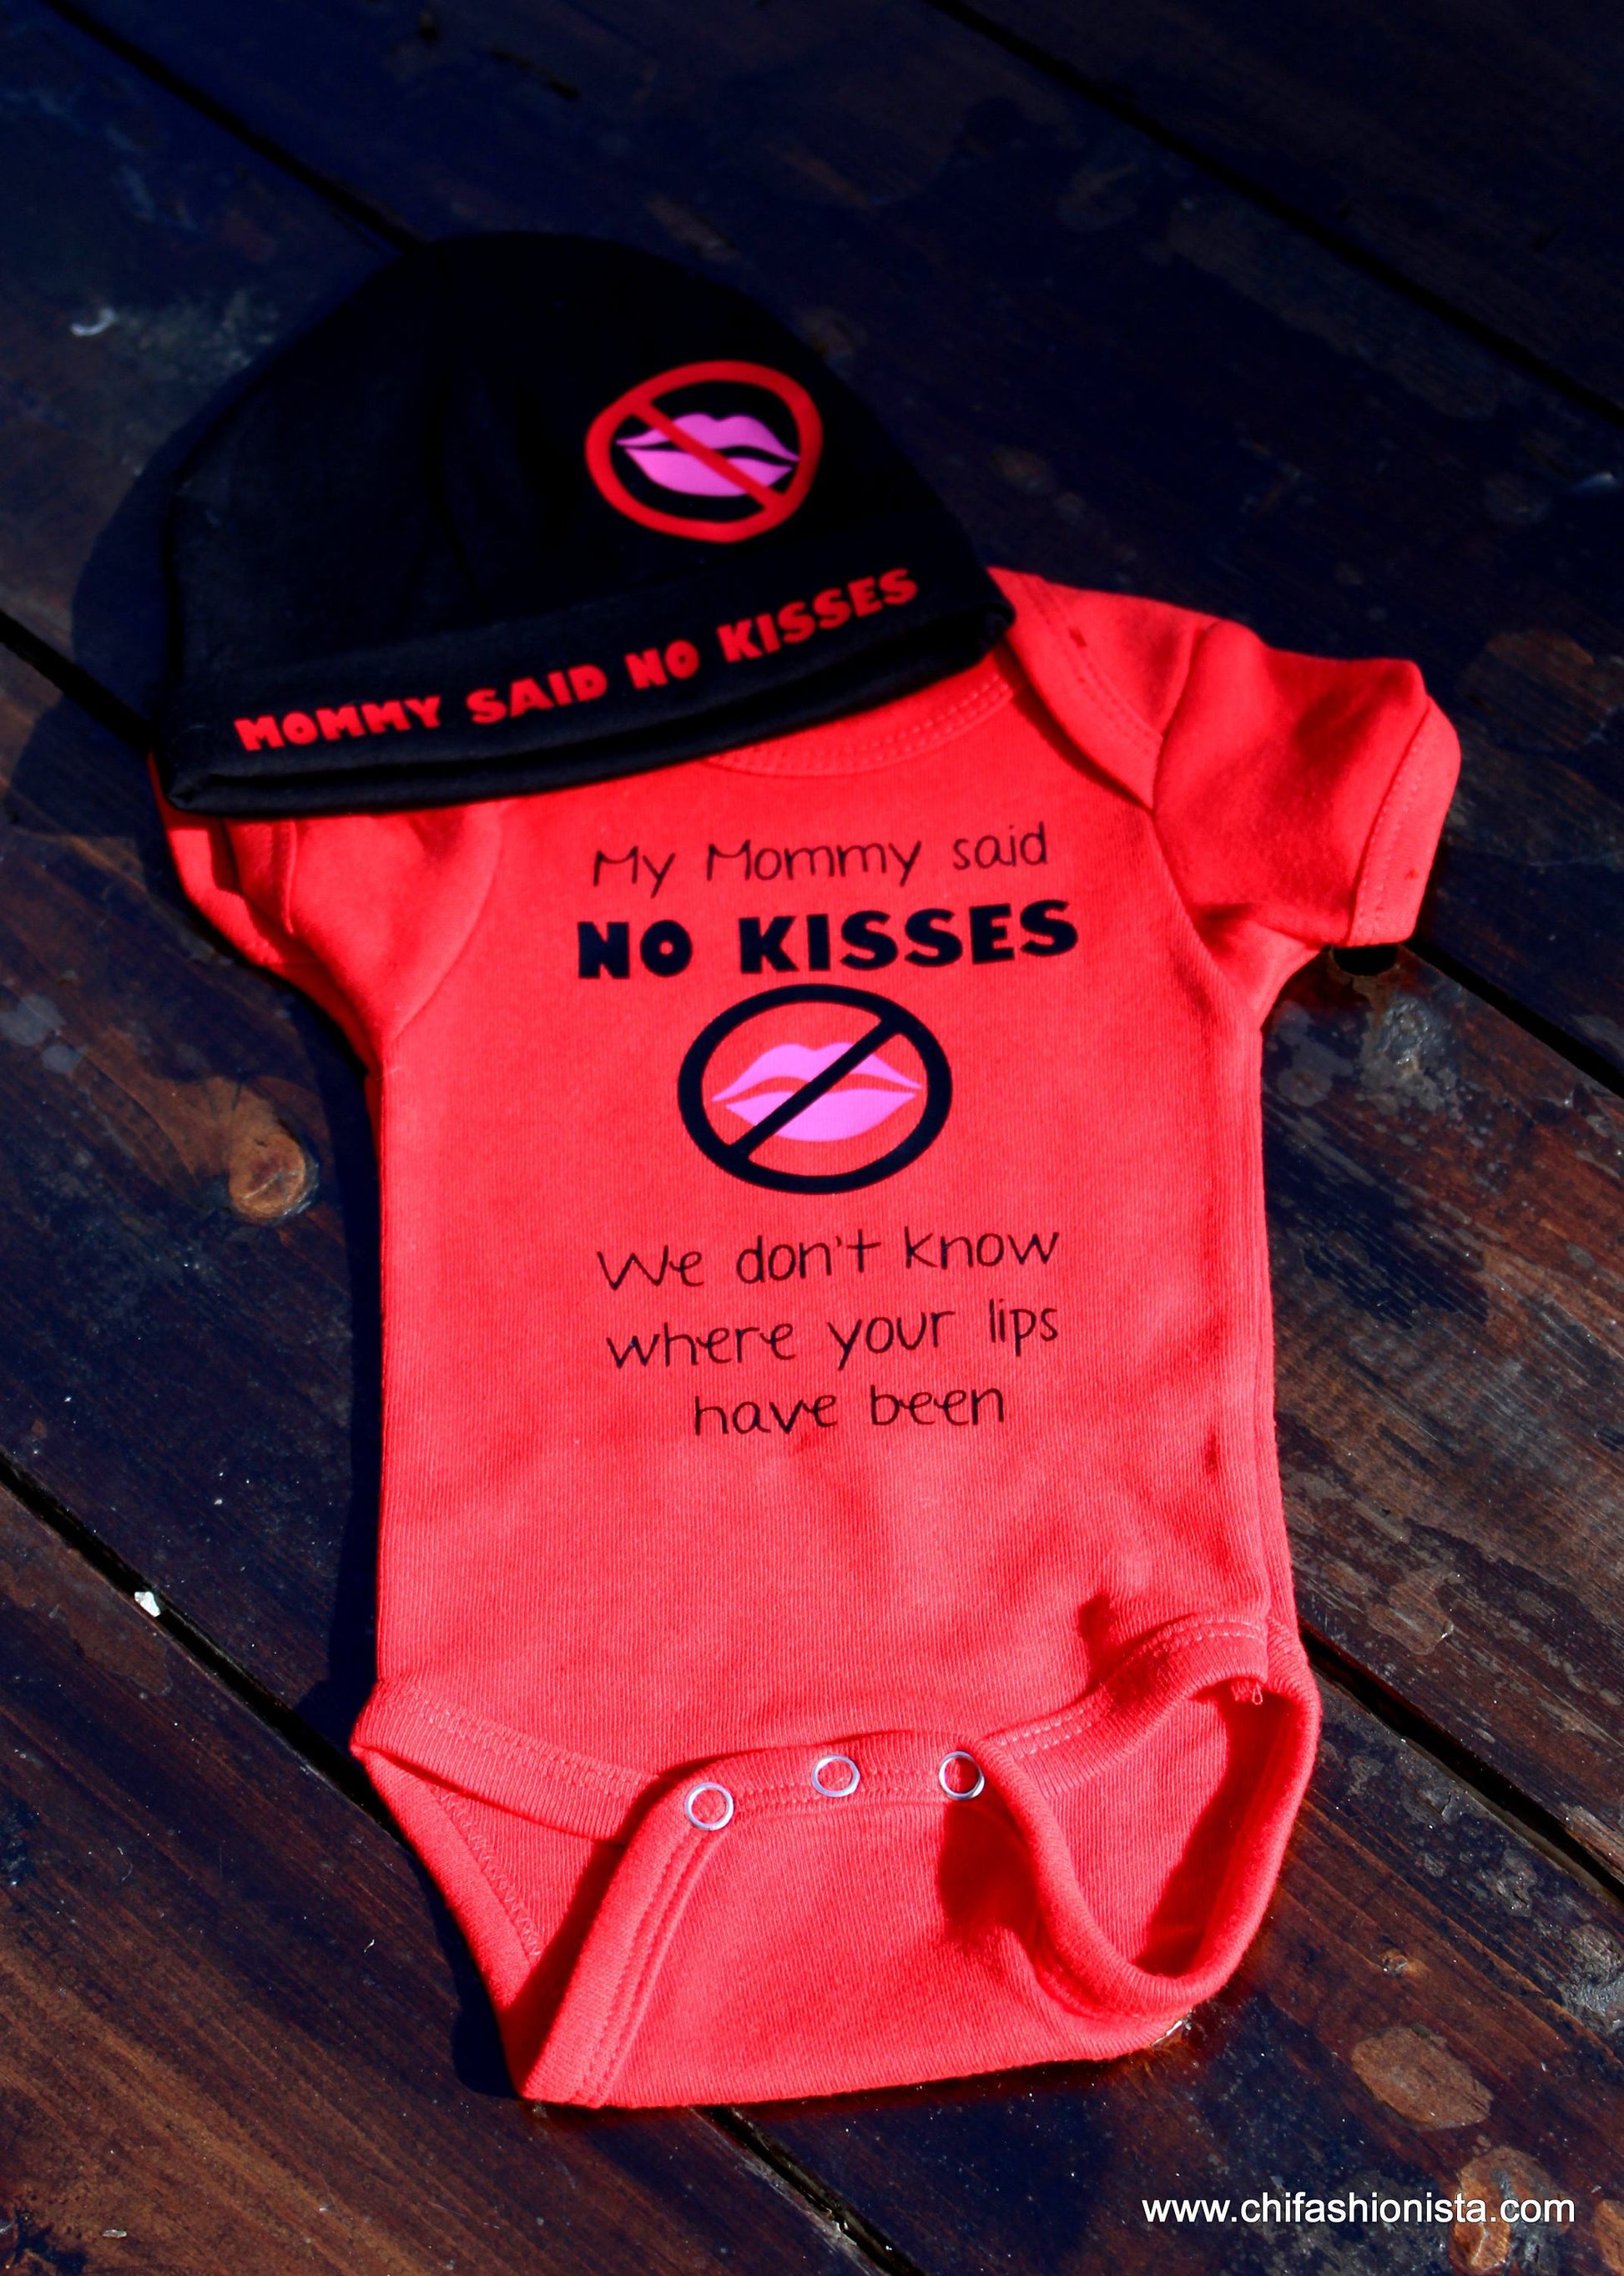 Handcrafted Children's Clothing, Clothing for Children and Parents, NO Kisses - We don't know where your lips have been, chi-fashionista